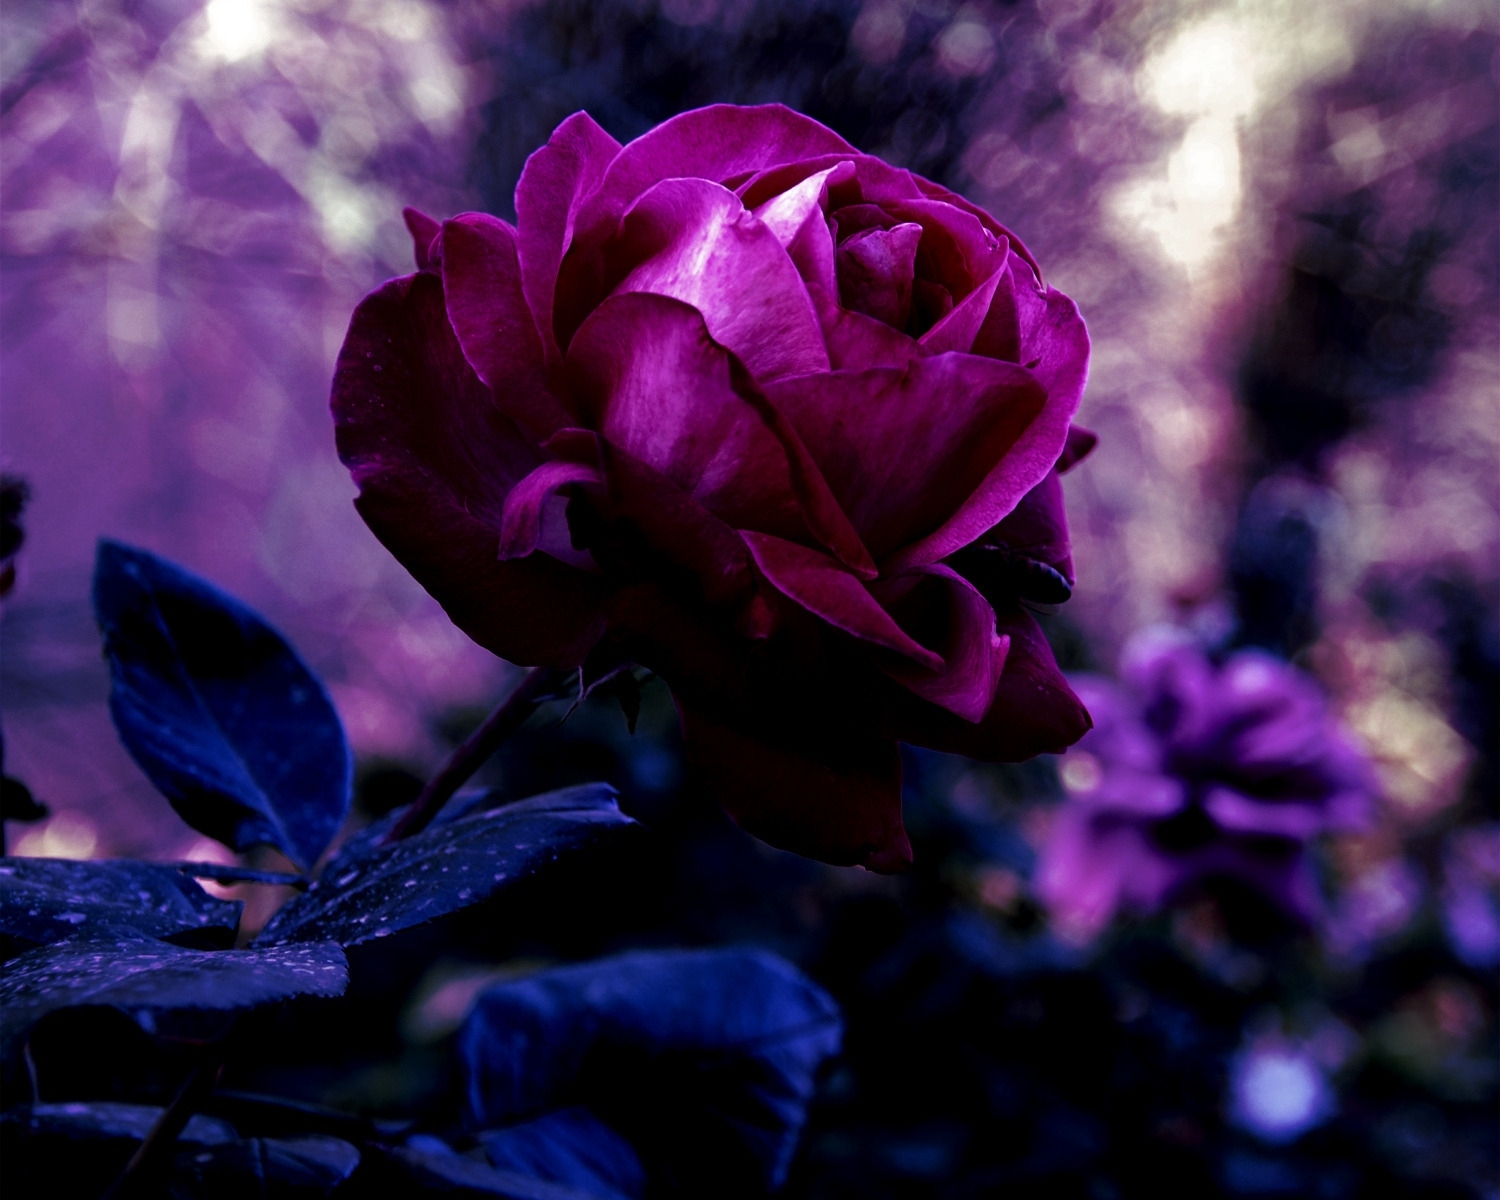 PC Wallpapers rose flower, flowers, drops, rose, bud, blur, smooth, evening